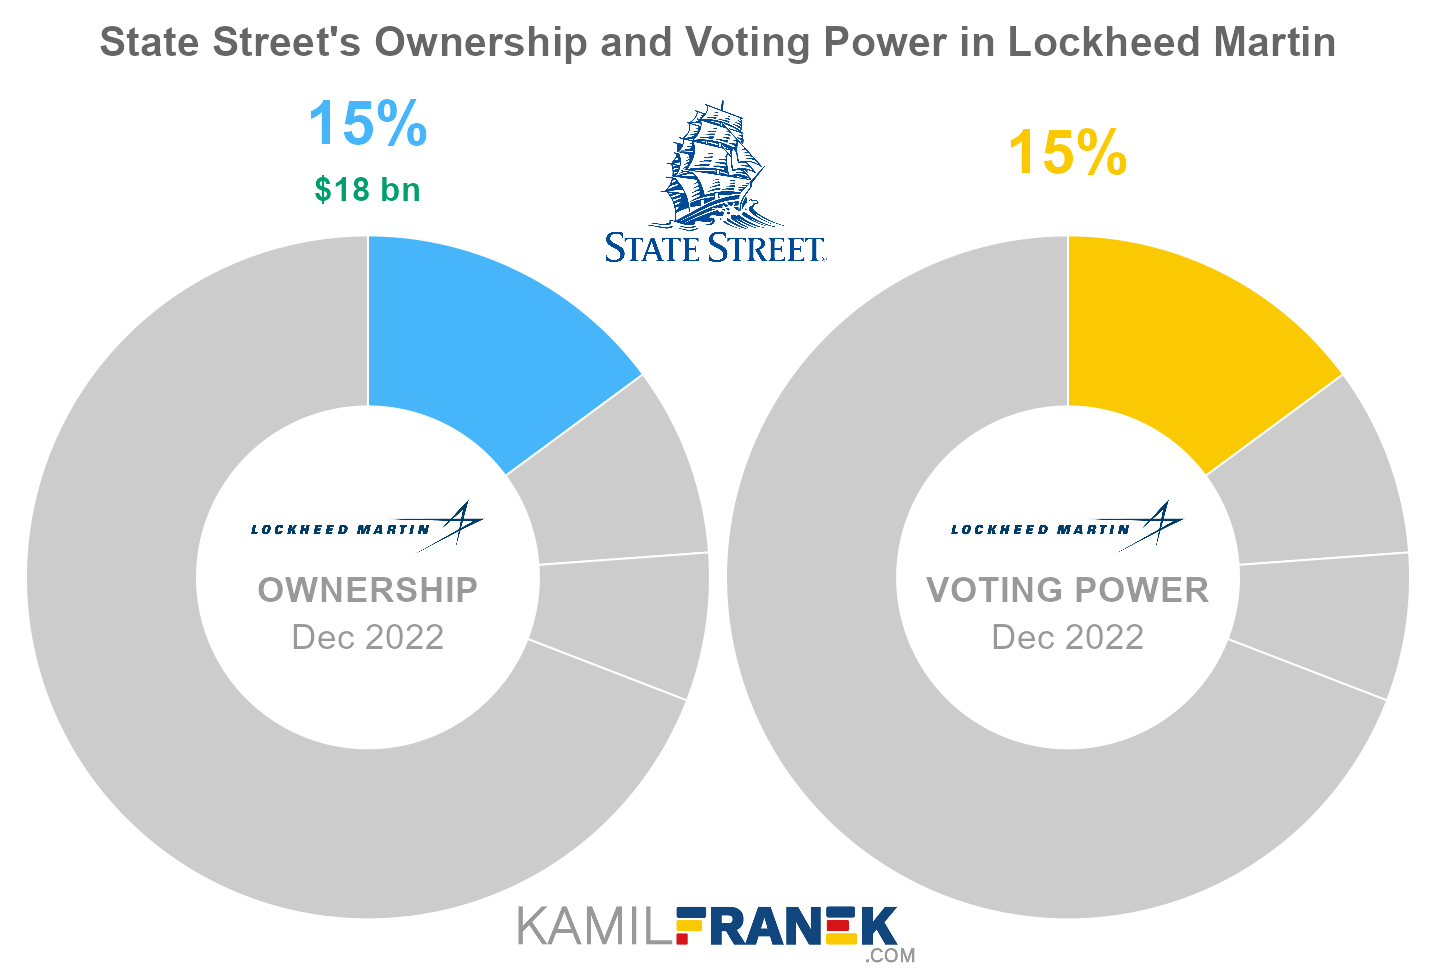 State Street's share ownership and voting power in Lockheed Martin (chart)